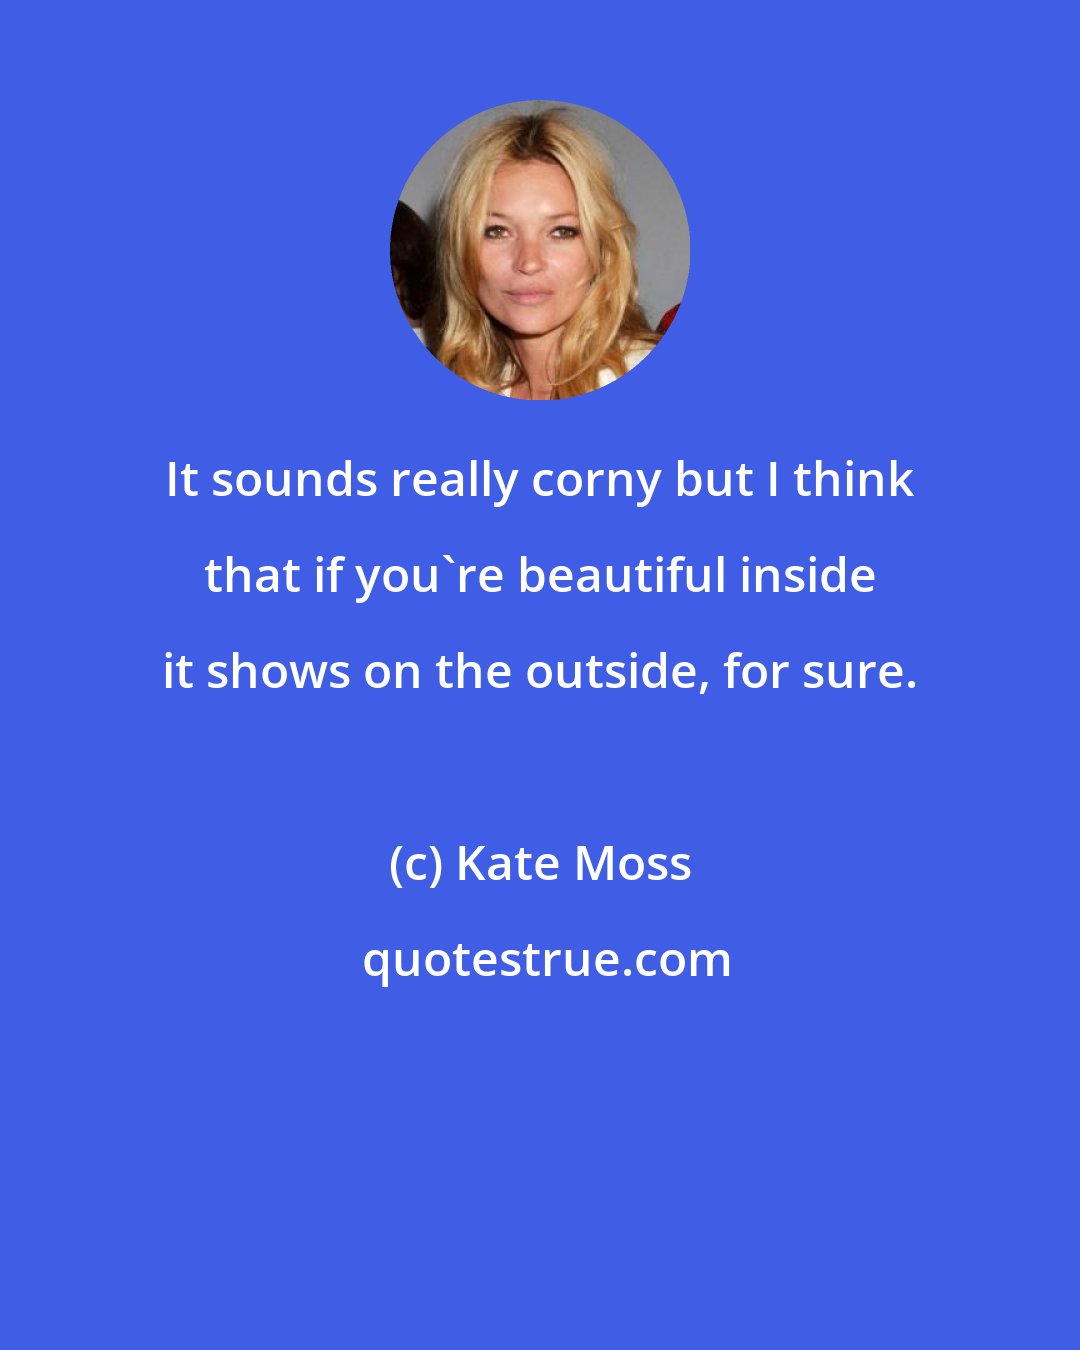 Kate Moss: It sounds really corny but I think that if you're beautiful inside it shows on the outside, for sure.